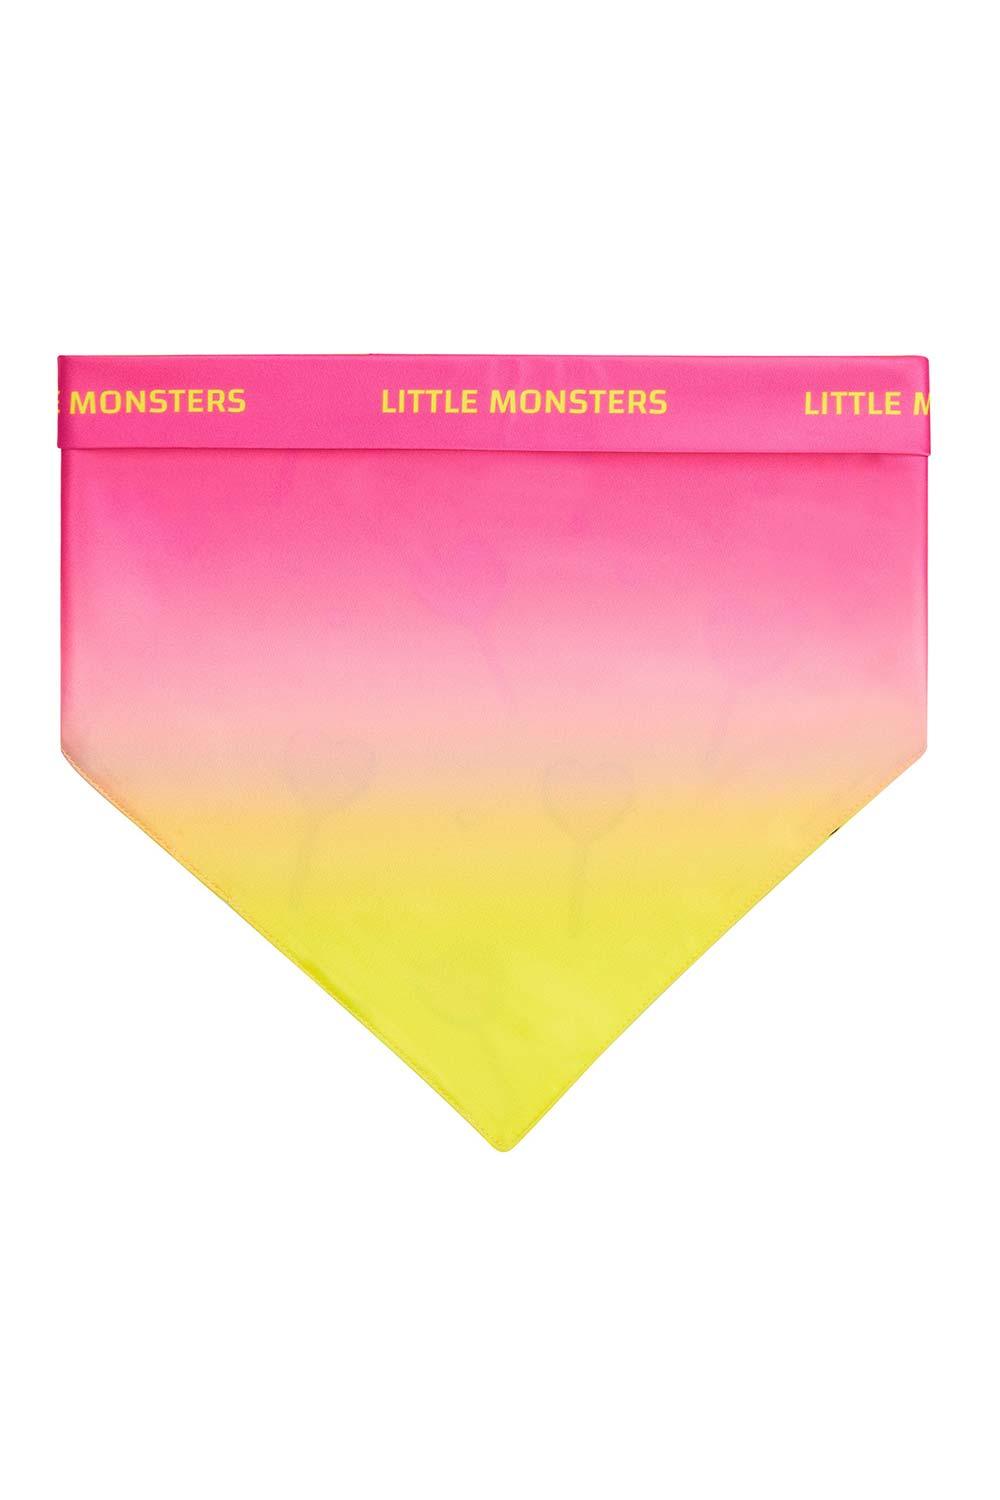 Little Monsters | Hearts Candy Bandana 1 | Milagron